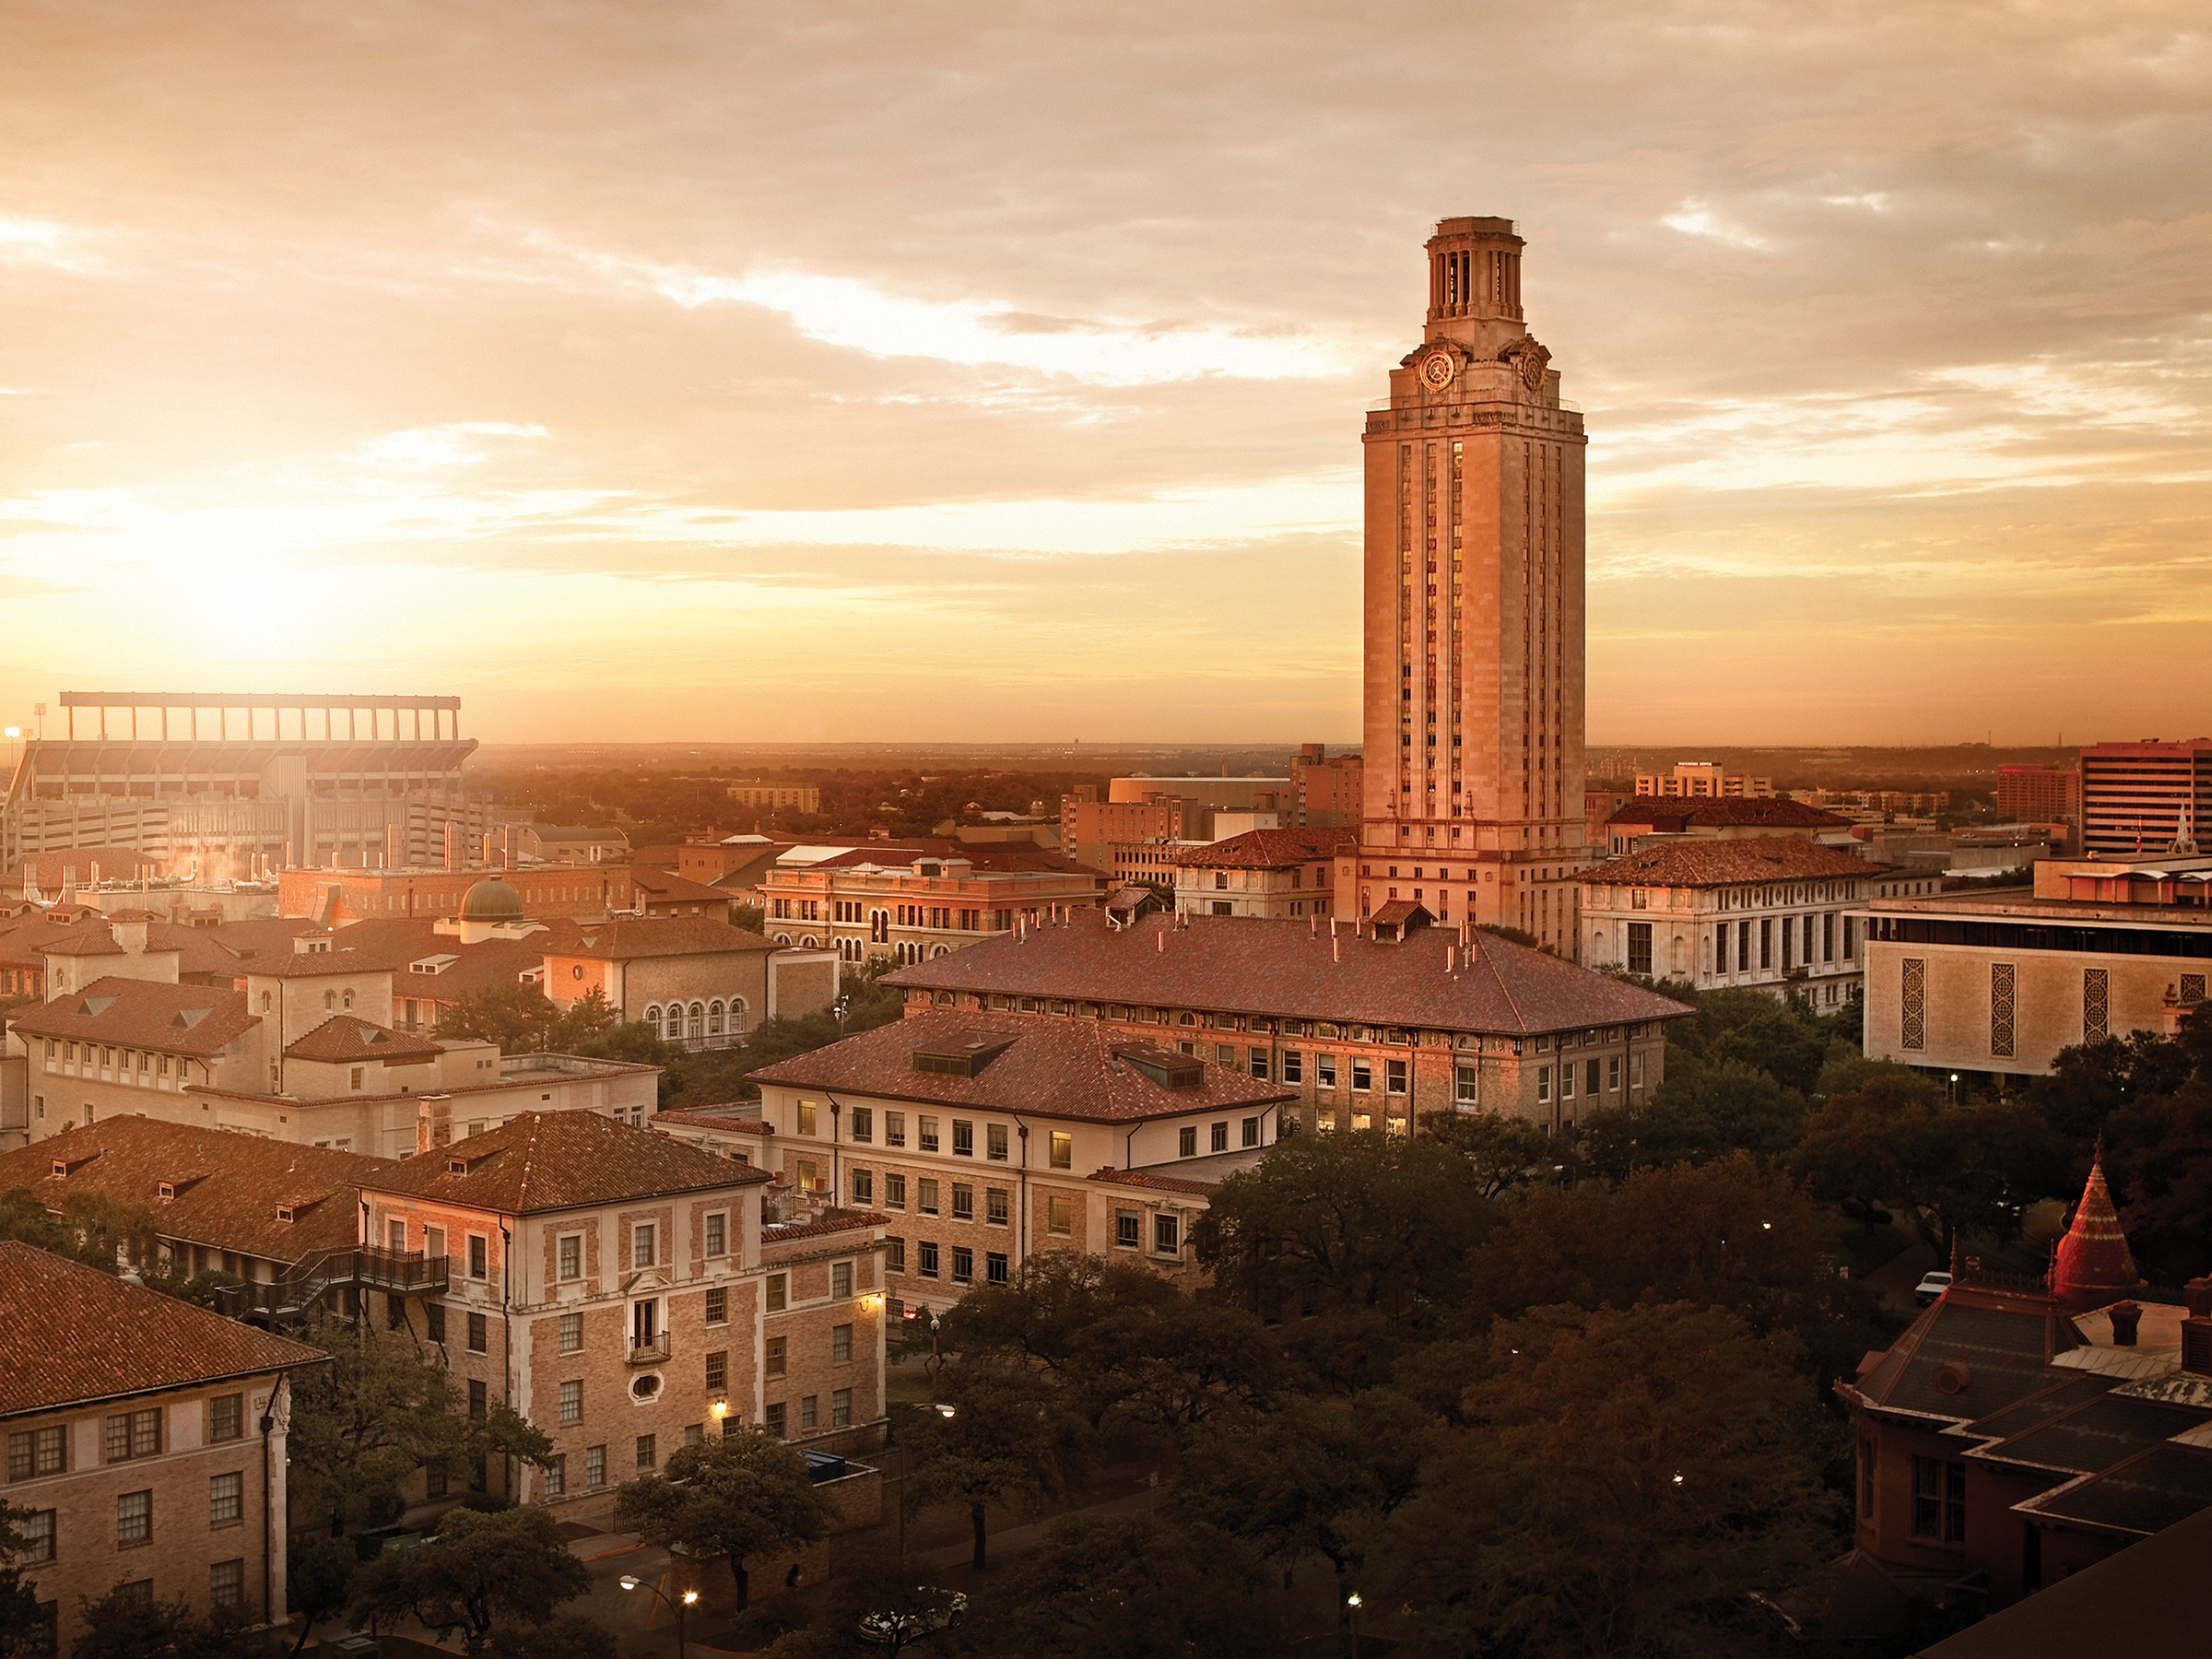 Aerial photo of UT Austin campus during sunrise with the UT Tower on the horizon in burnt orange hues.